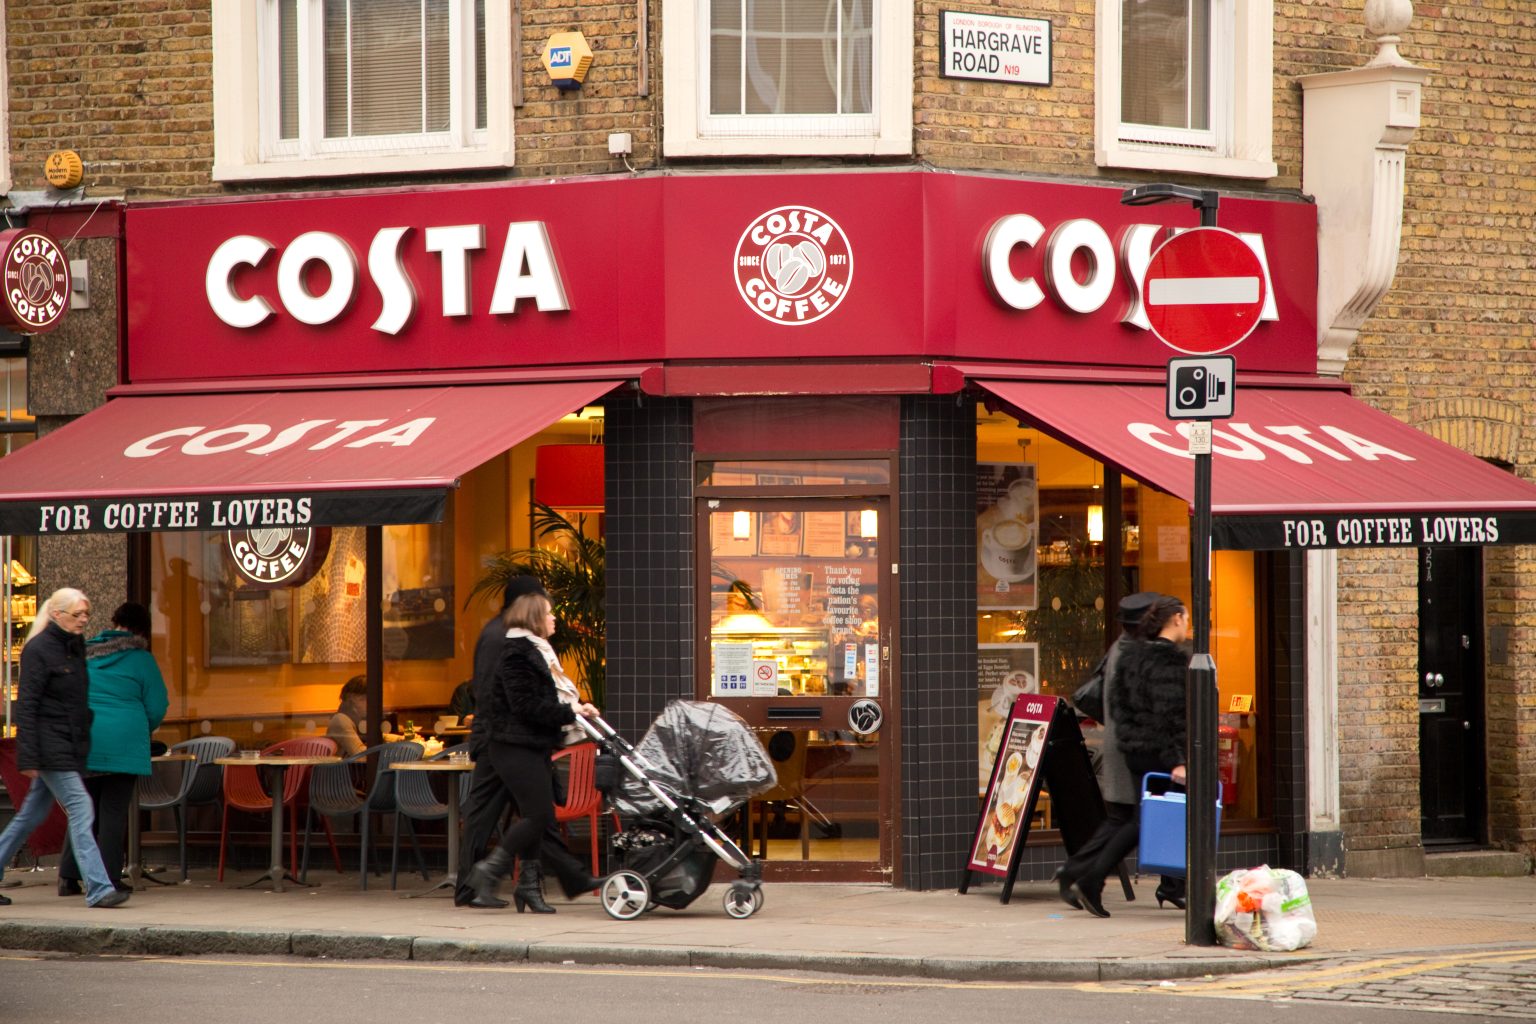 Costa recalls products warning they “may contain small stones”